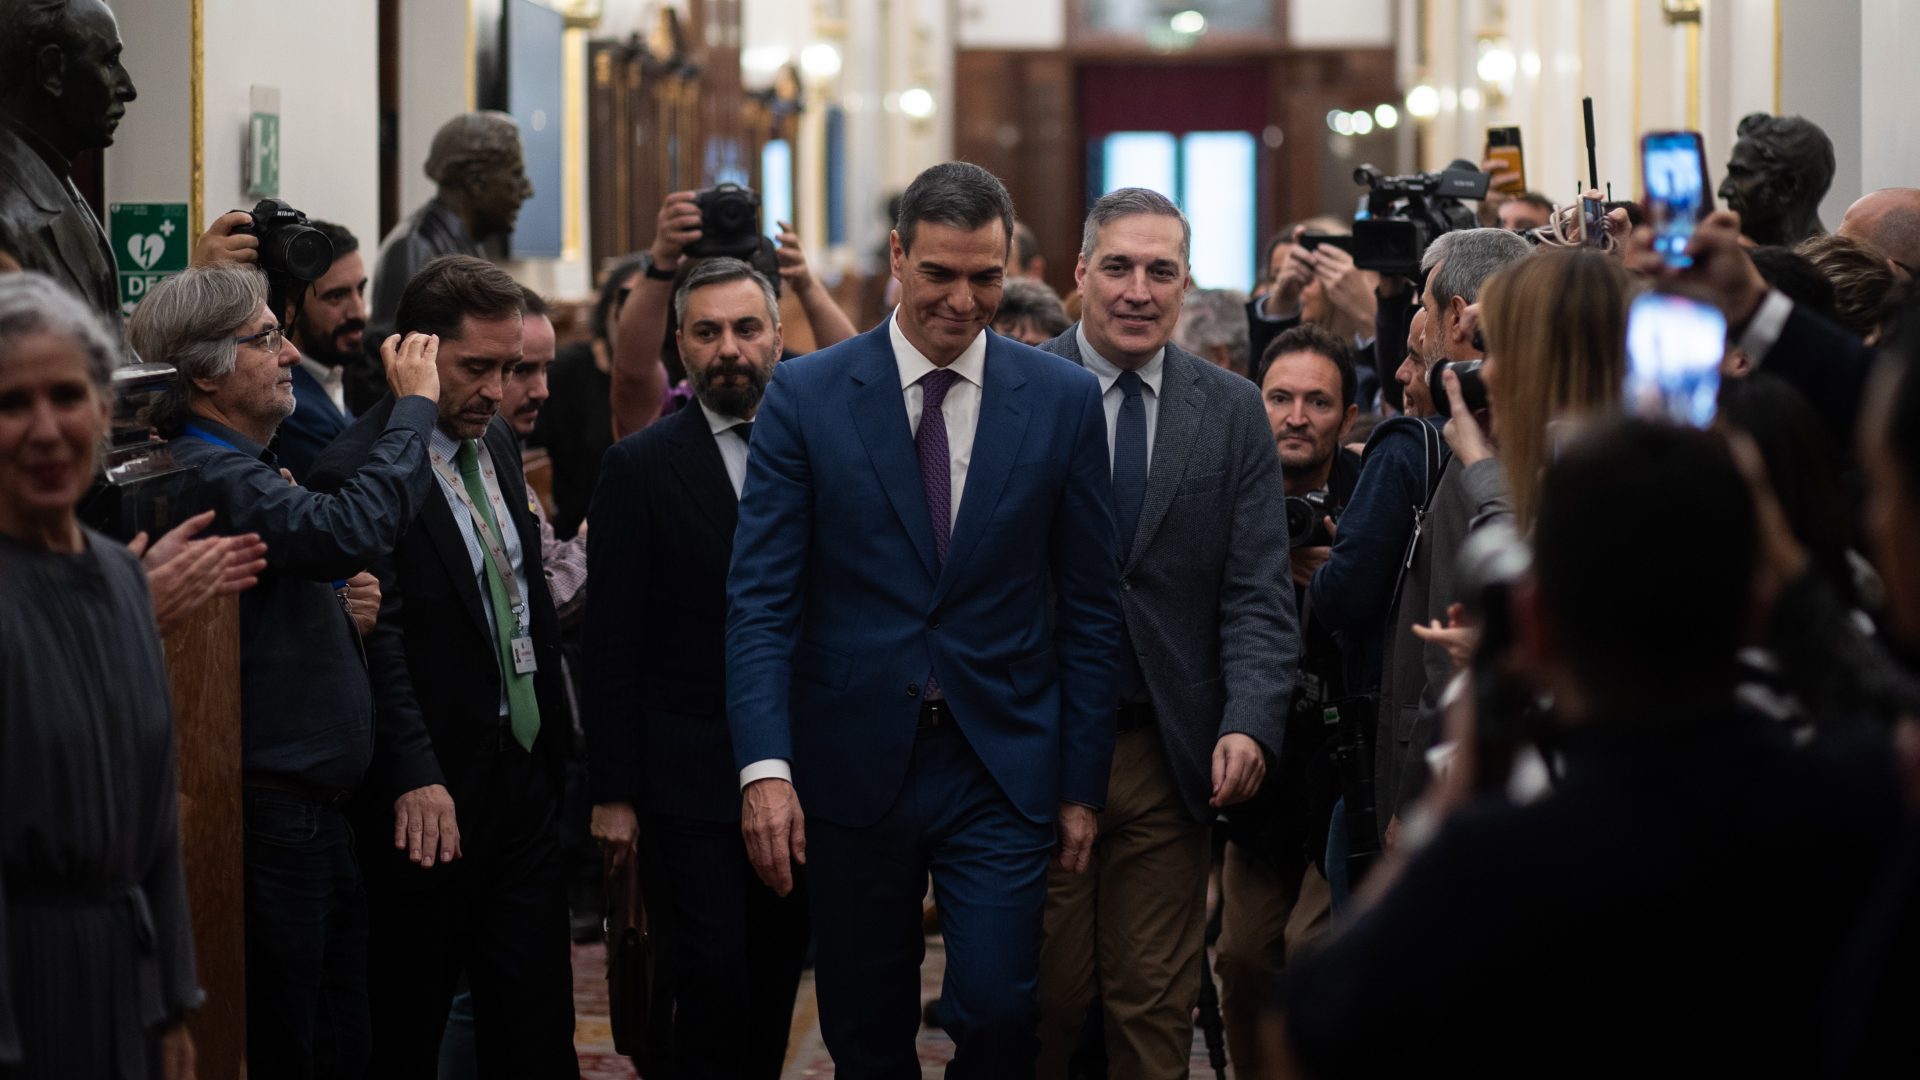 The newly appointed President of the Government, Pedro Sanchez. Photo: Alejandro Martinez Velez/Europa Press via Getty Images